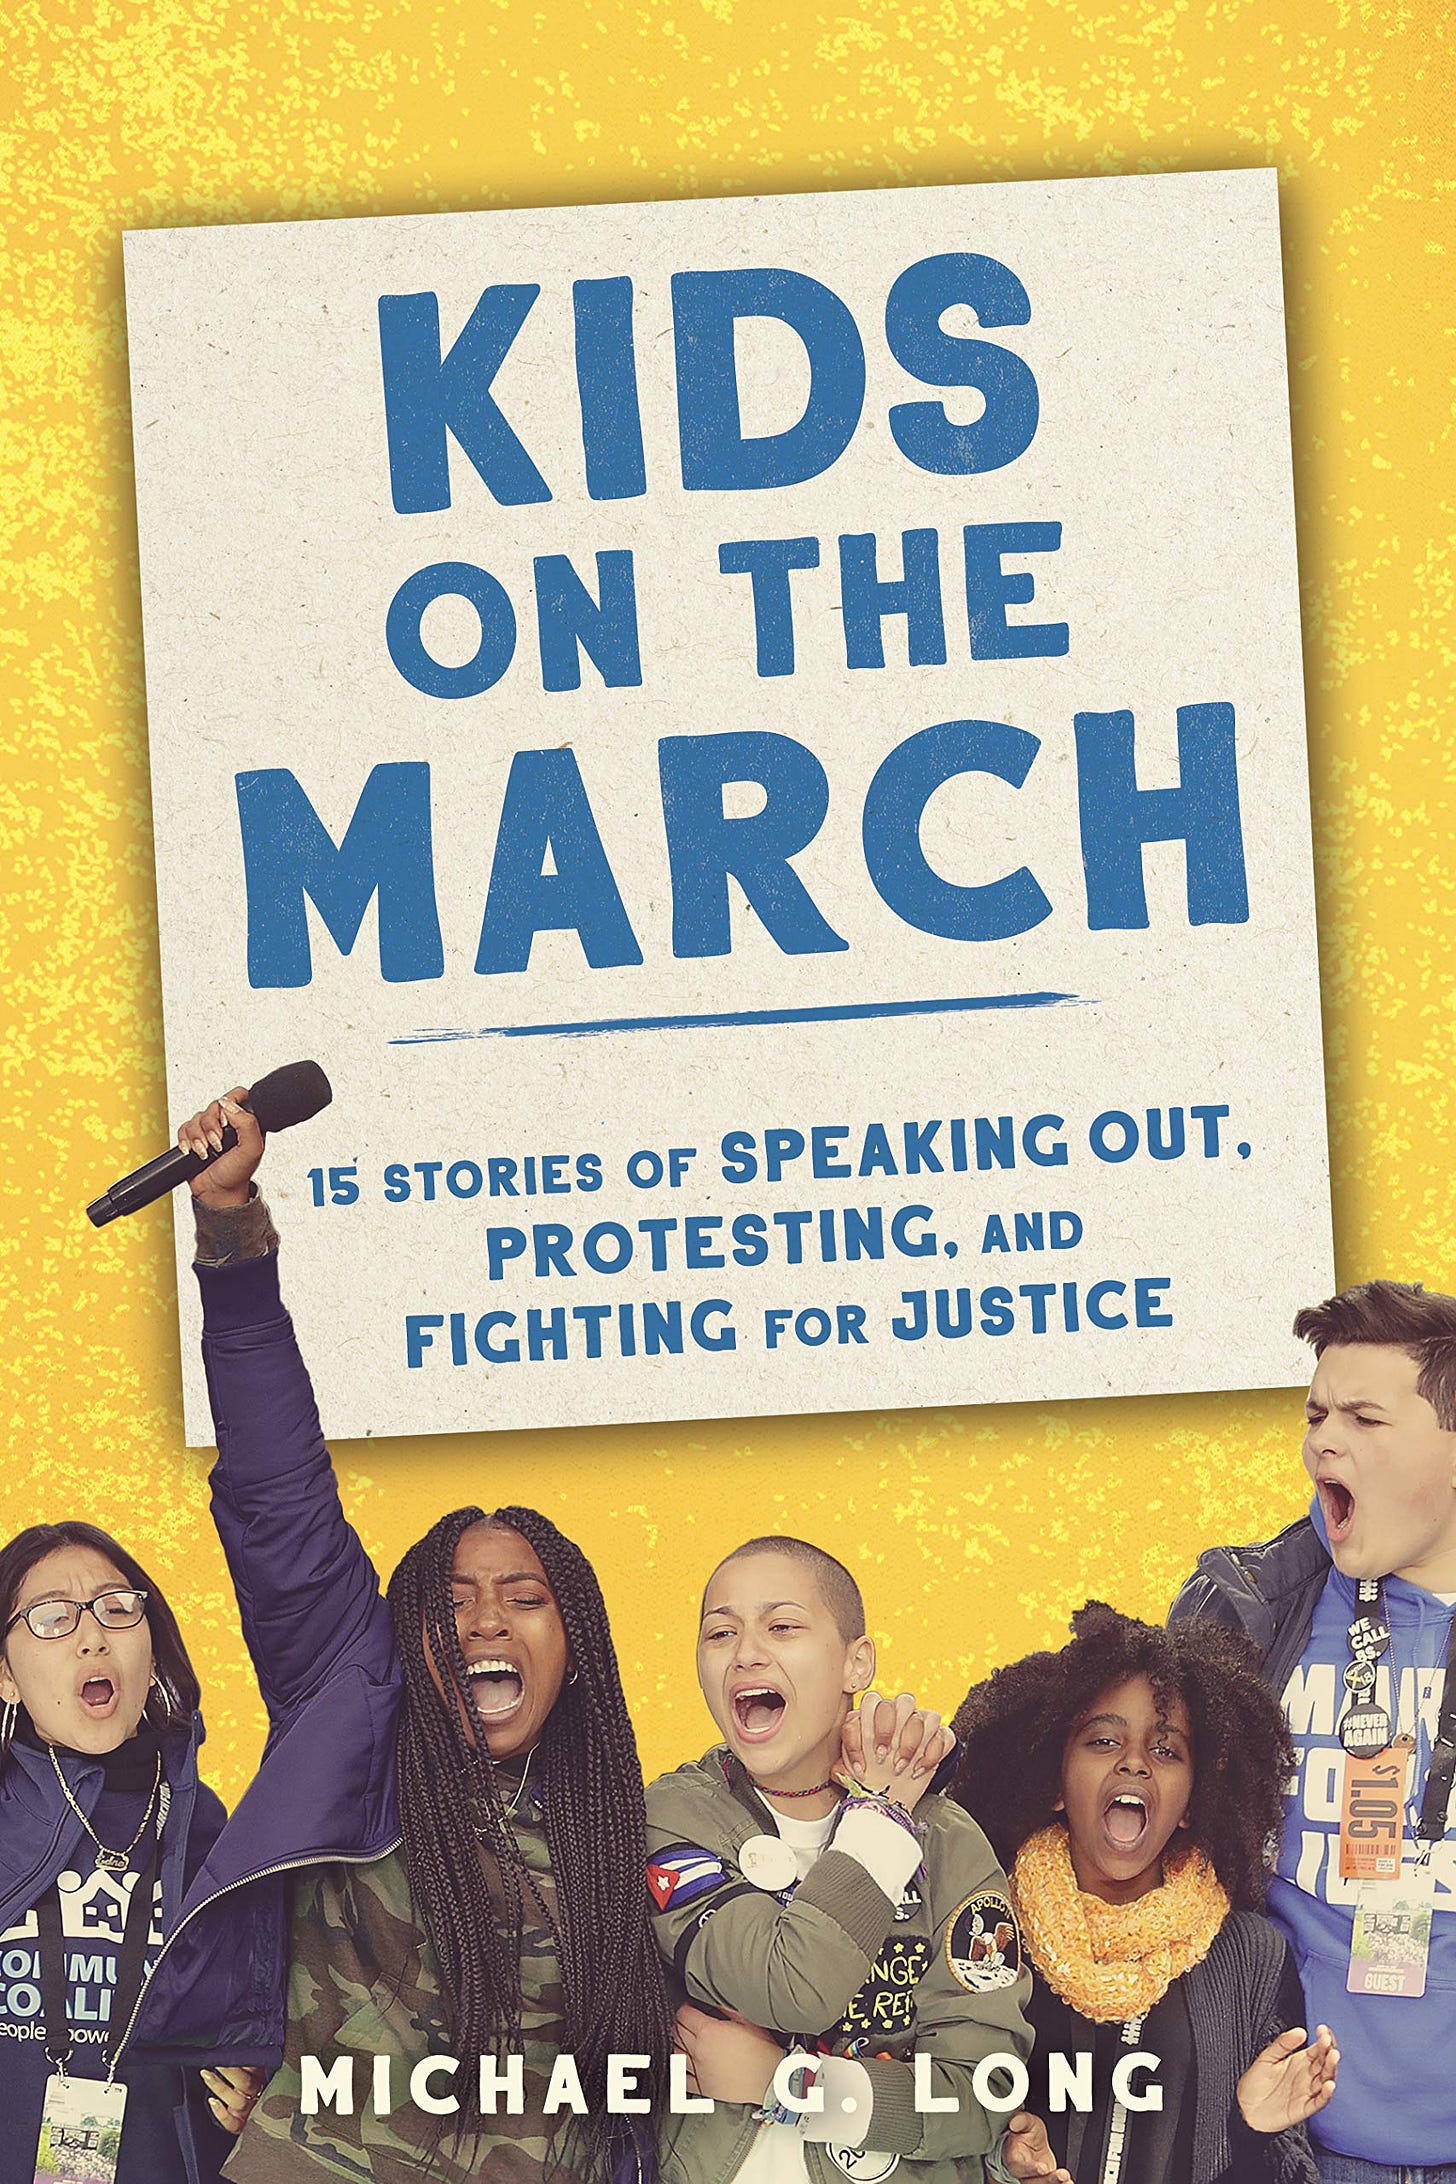 Amazon.com: Kids on the March: 15 Stories of Speaking Out, Protesting, and  Fighting for Justice (9781643751009): Long, Michael: Books